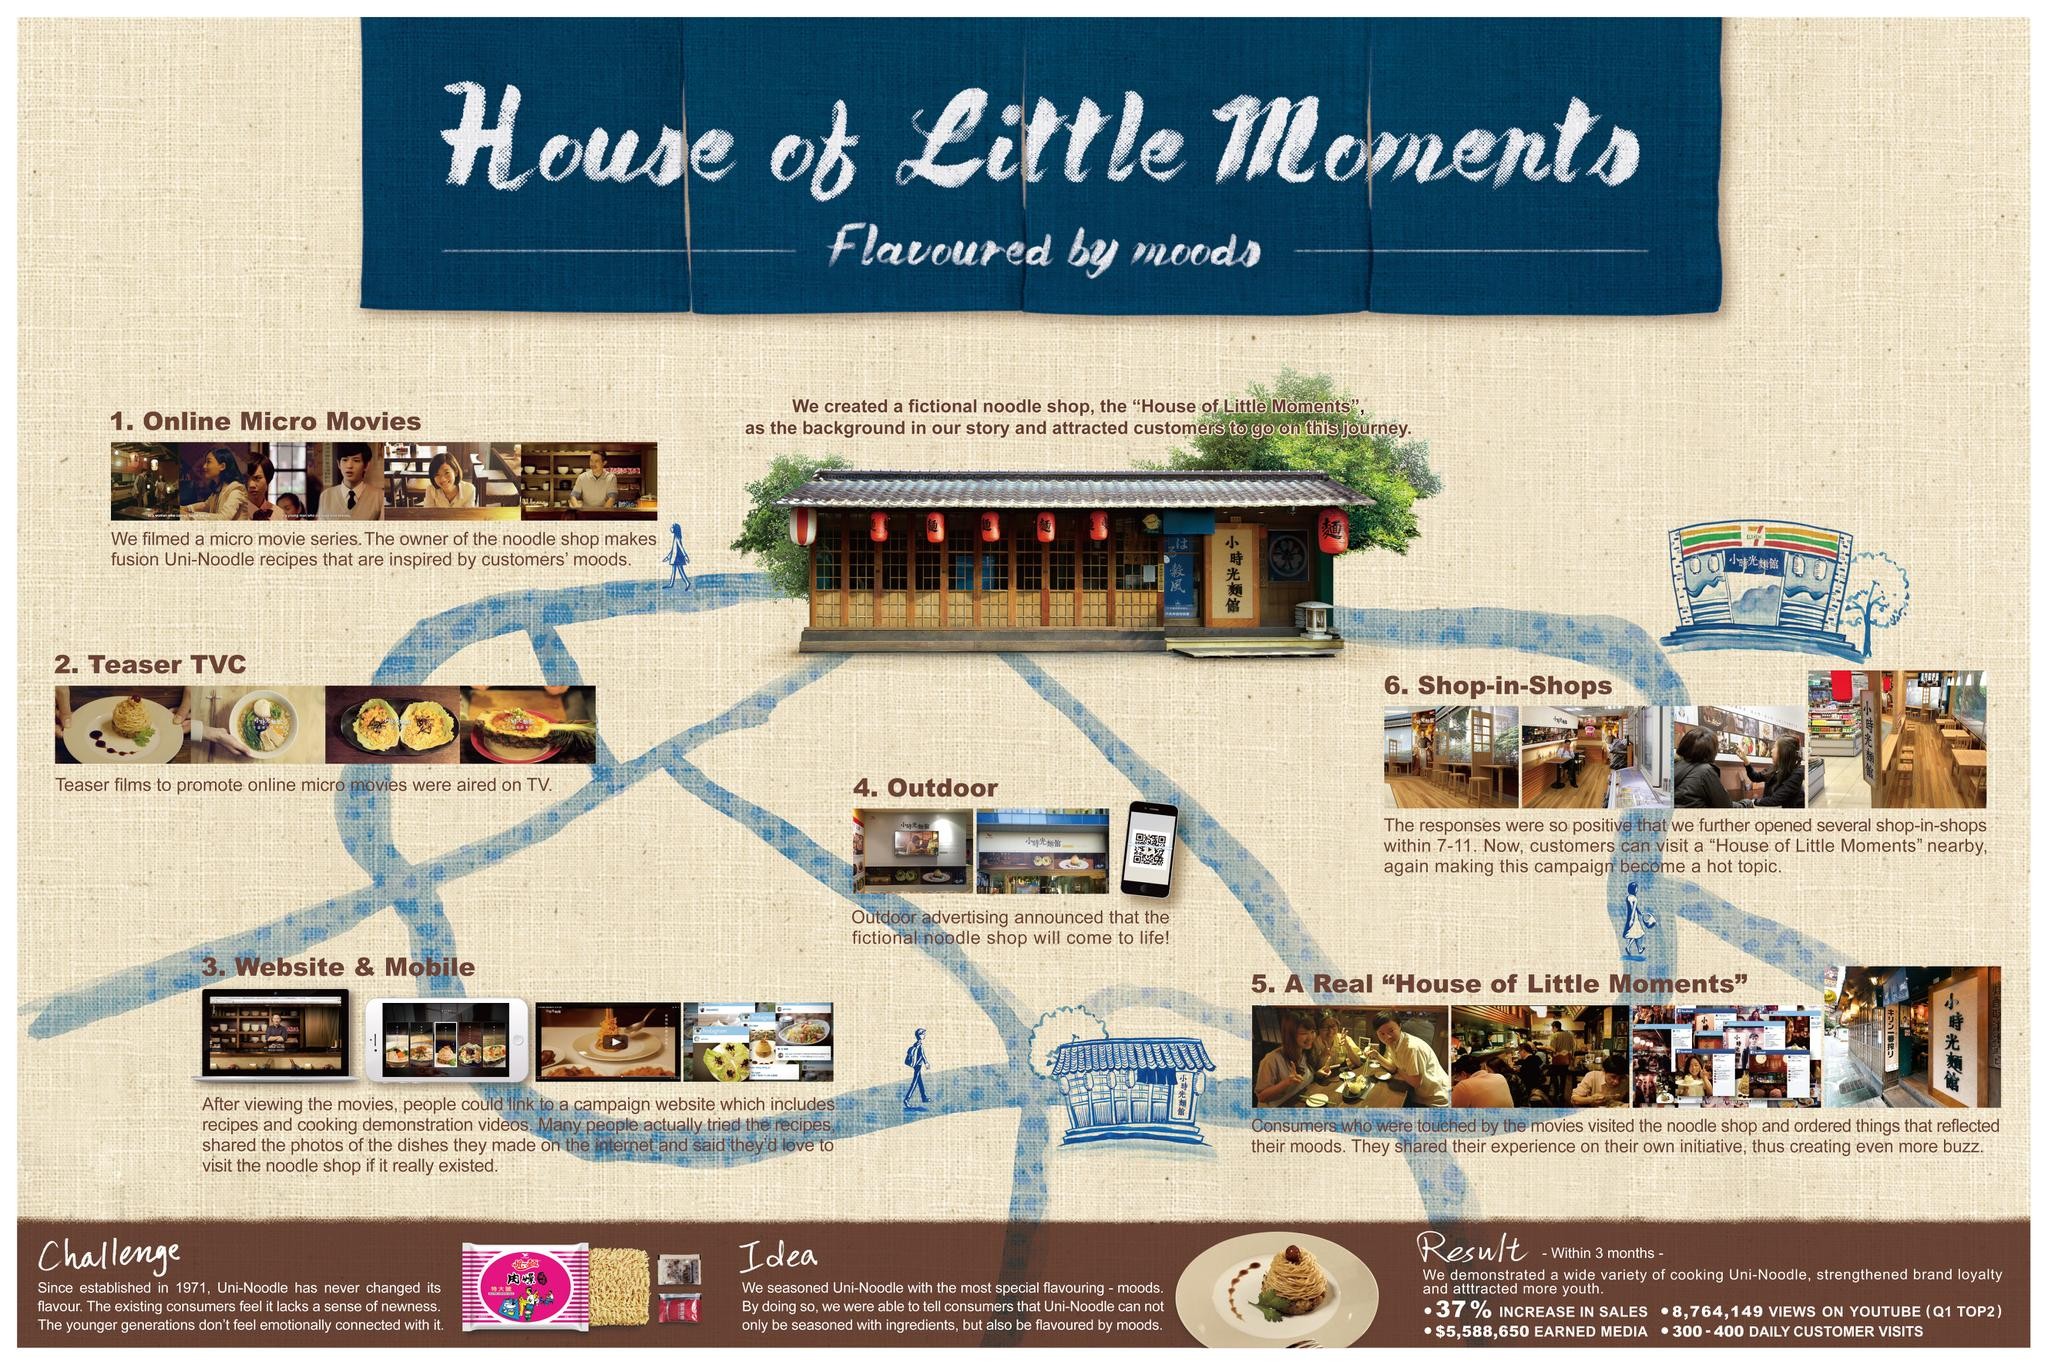 HOUSE OF LITTLE MOMENTS